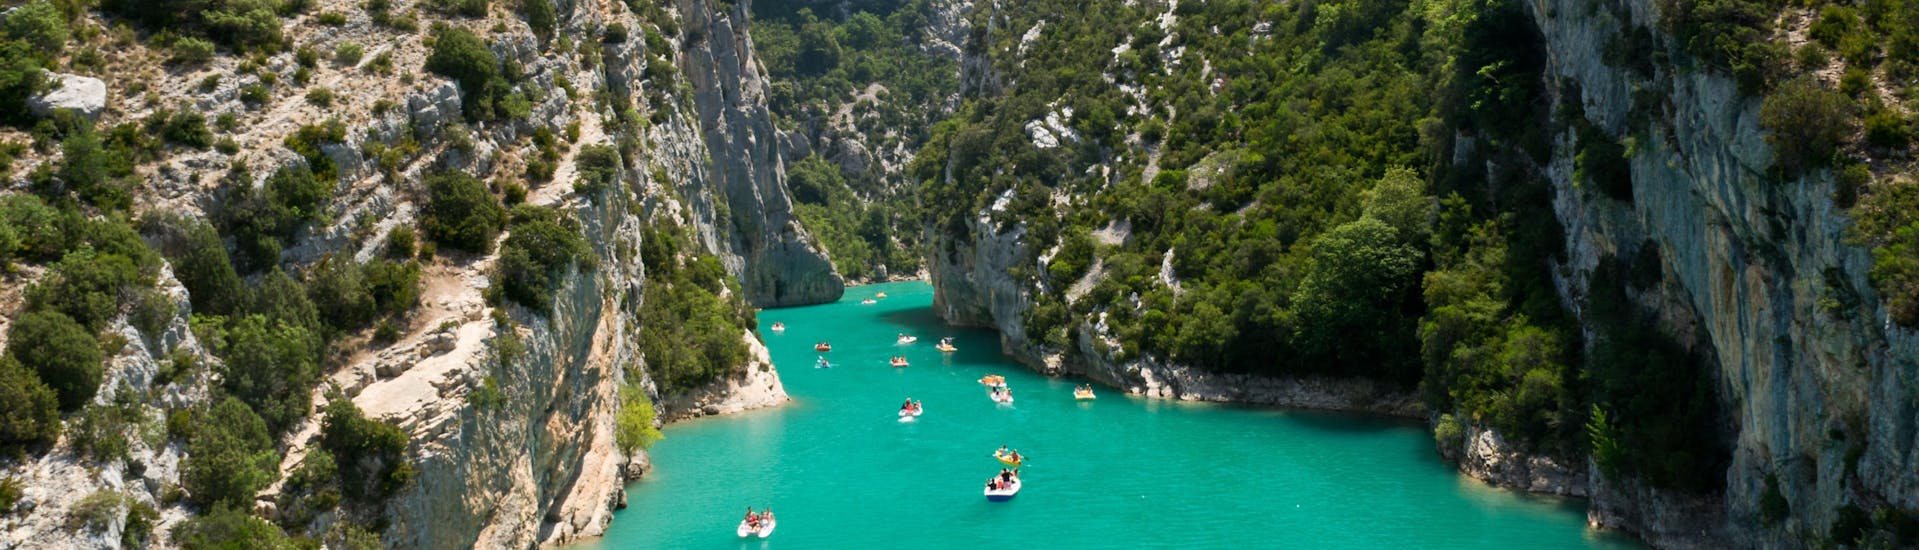 An image of the spectacular entrance to the famous gorge that attracts many visitors to go rafting on the Verdon river.